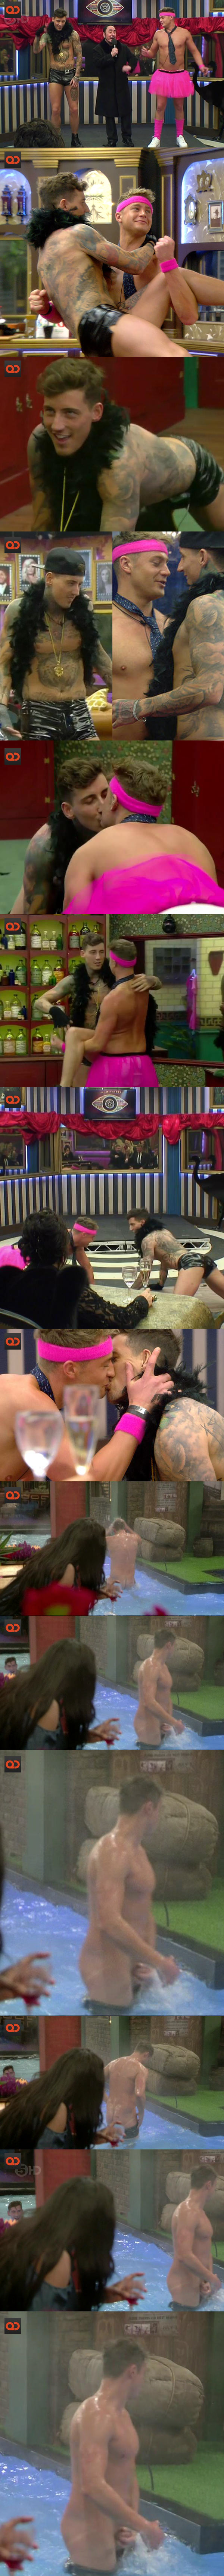 qc-whats_going_on_between_jeremy_mcconnell_and_scott_timlin_on_celebrity_big_brother-collage03